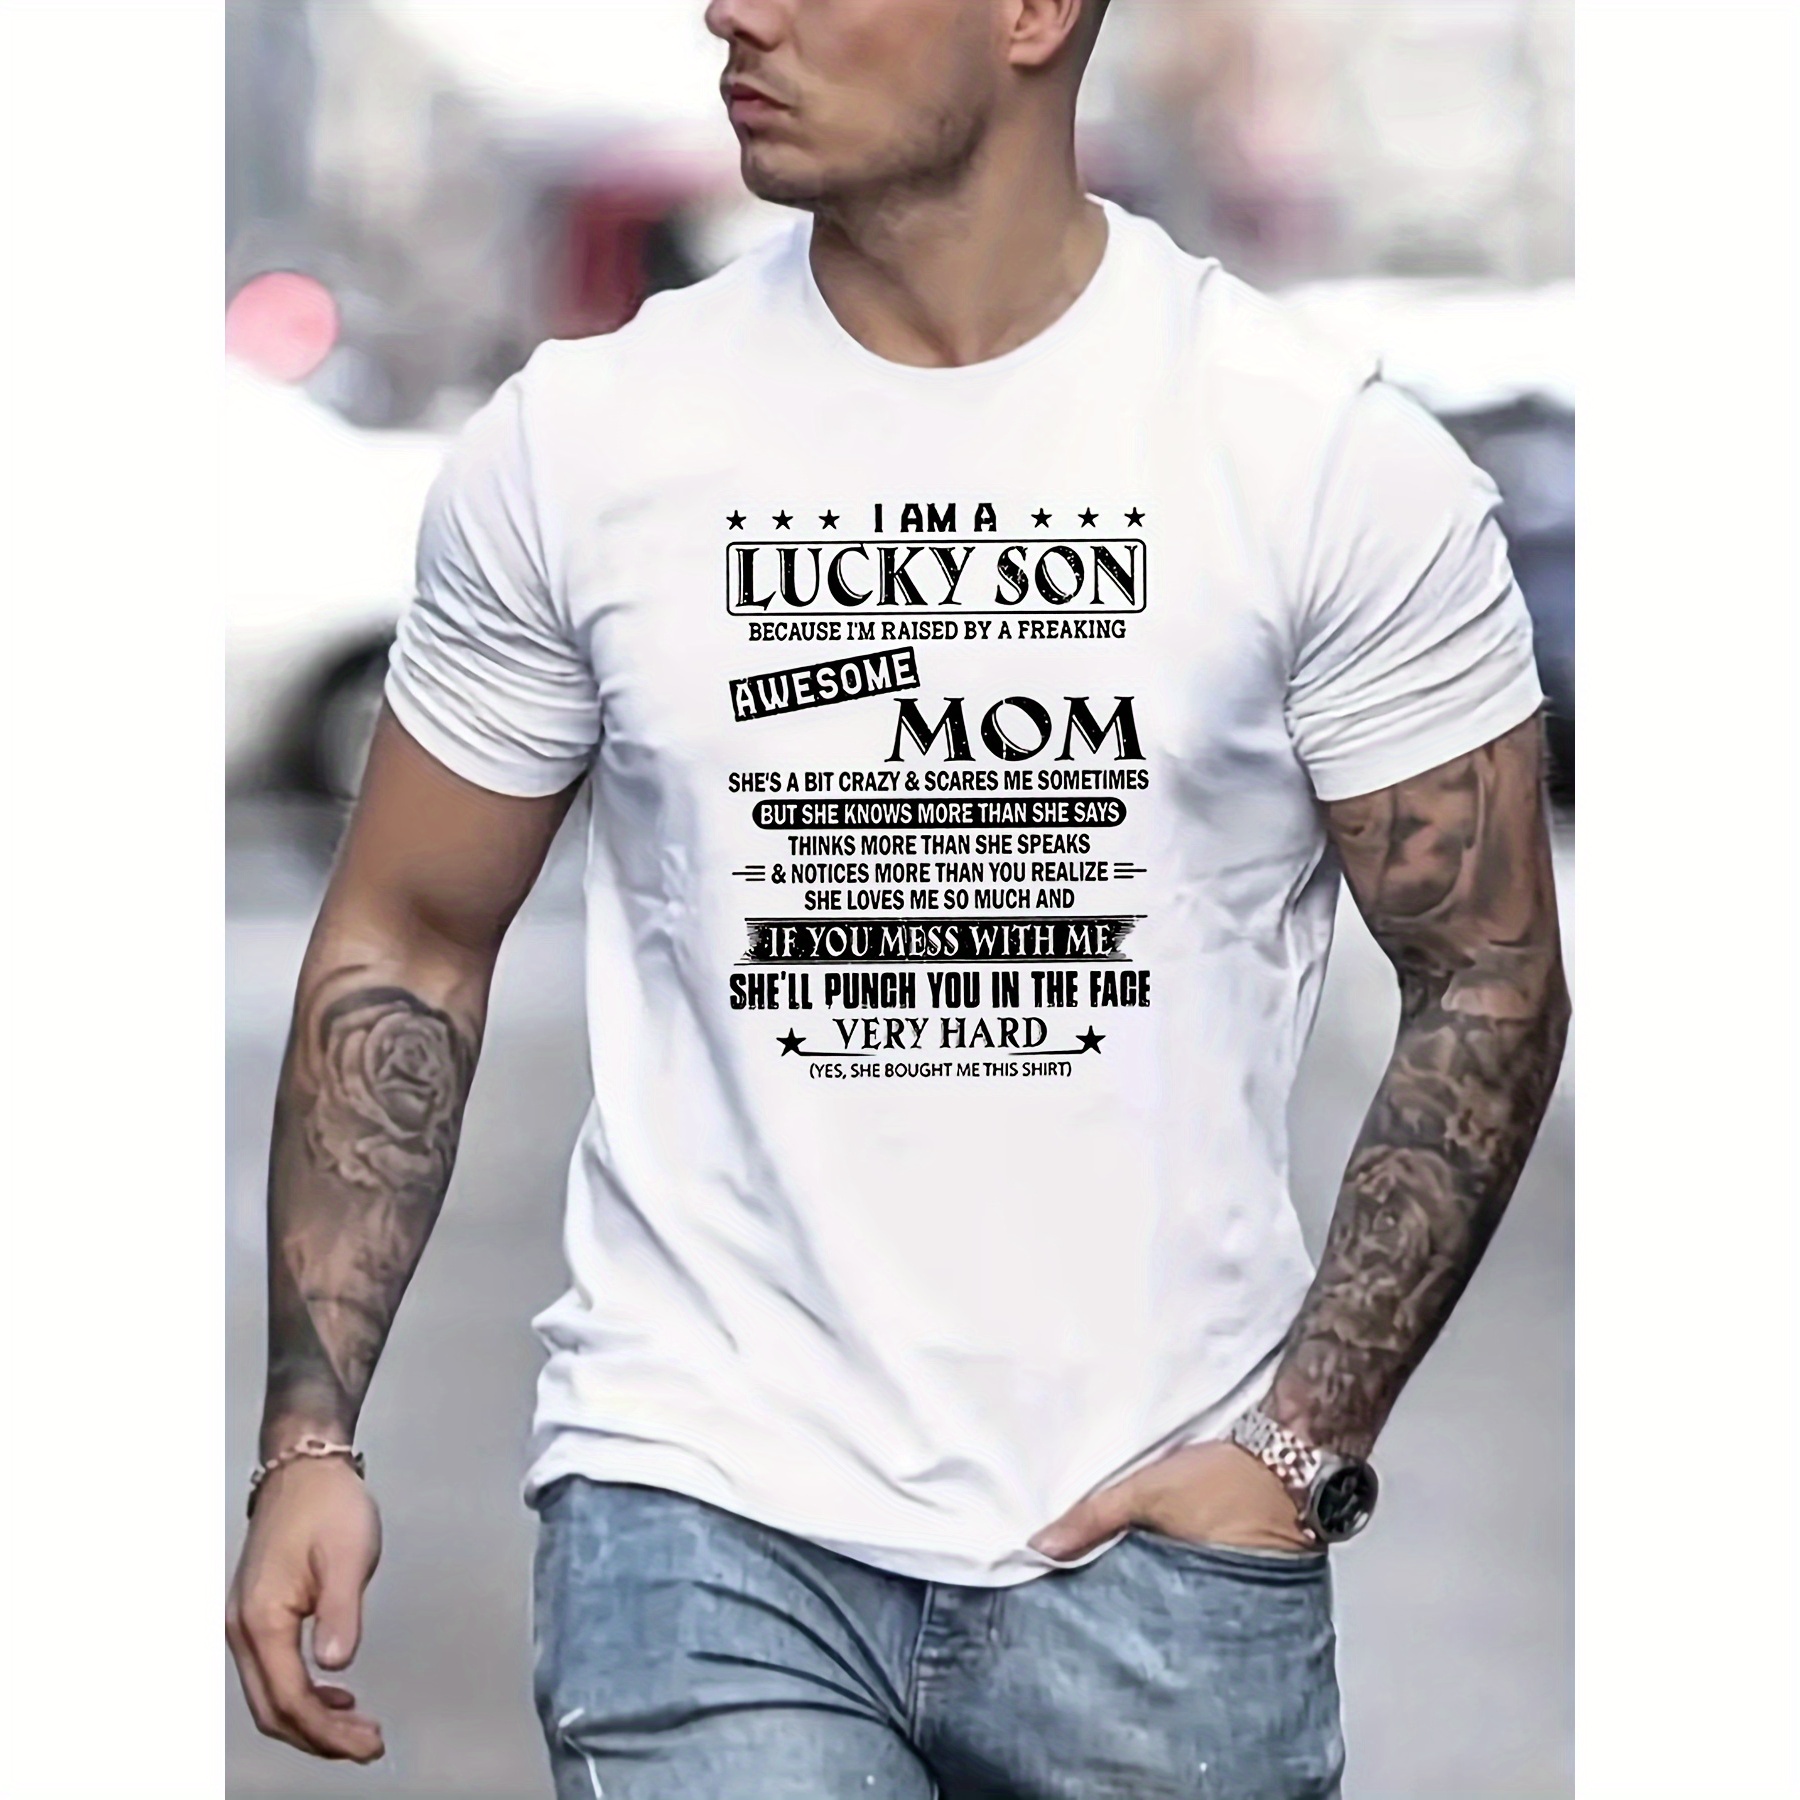 

Raised By An Awesome Mom Print T Shirt, Tees For Men, Casual Short Sleeve Tshirt For Summer